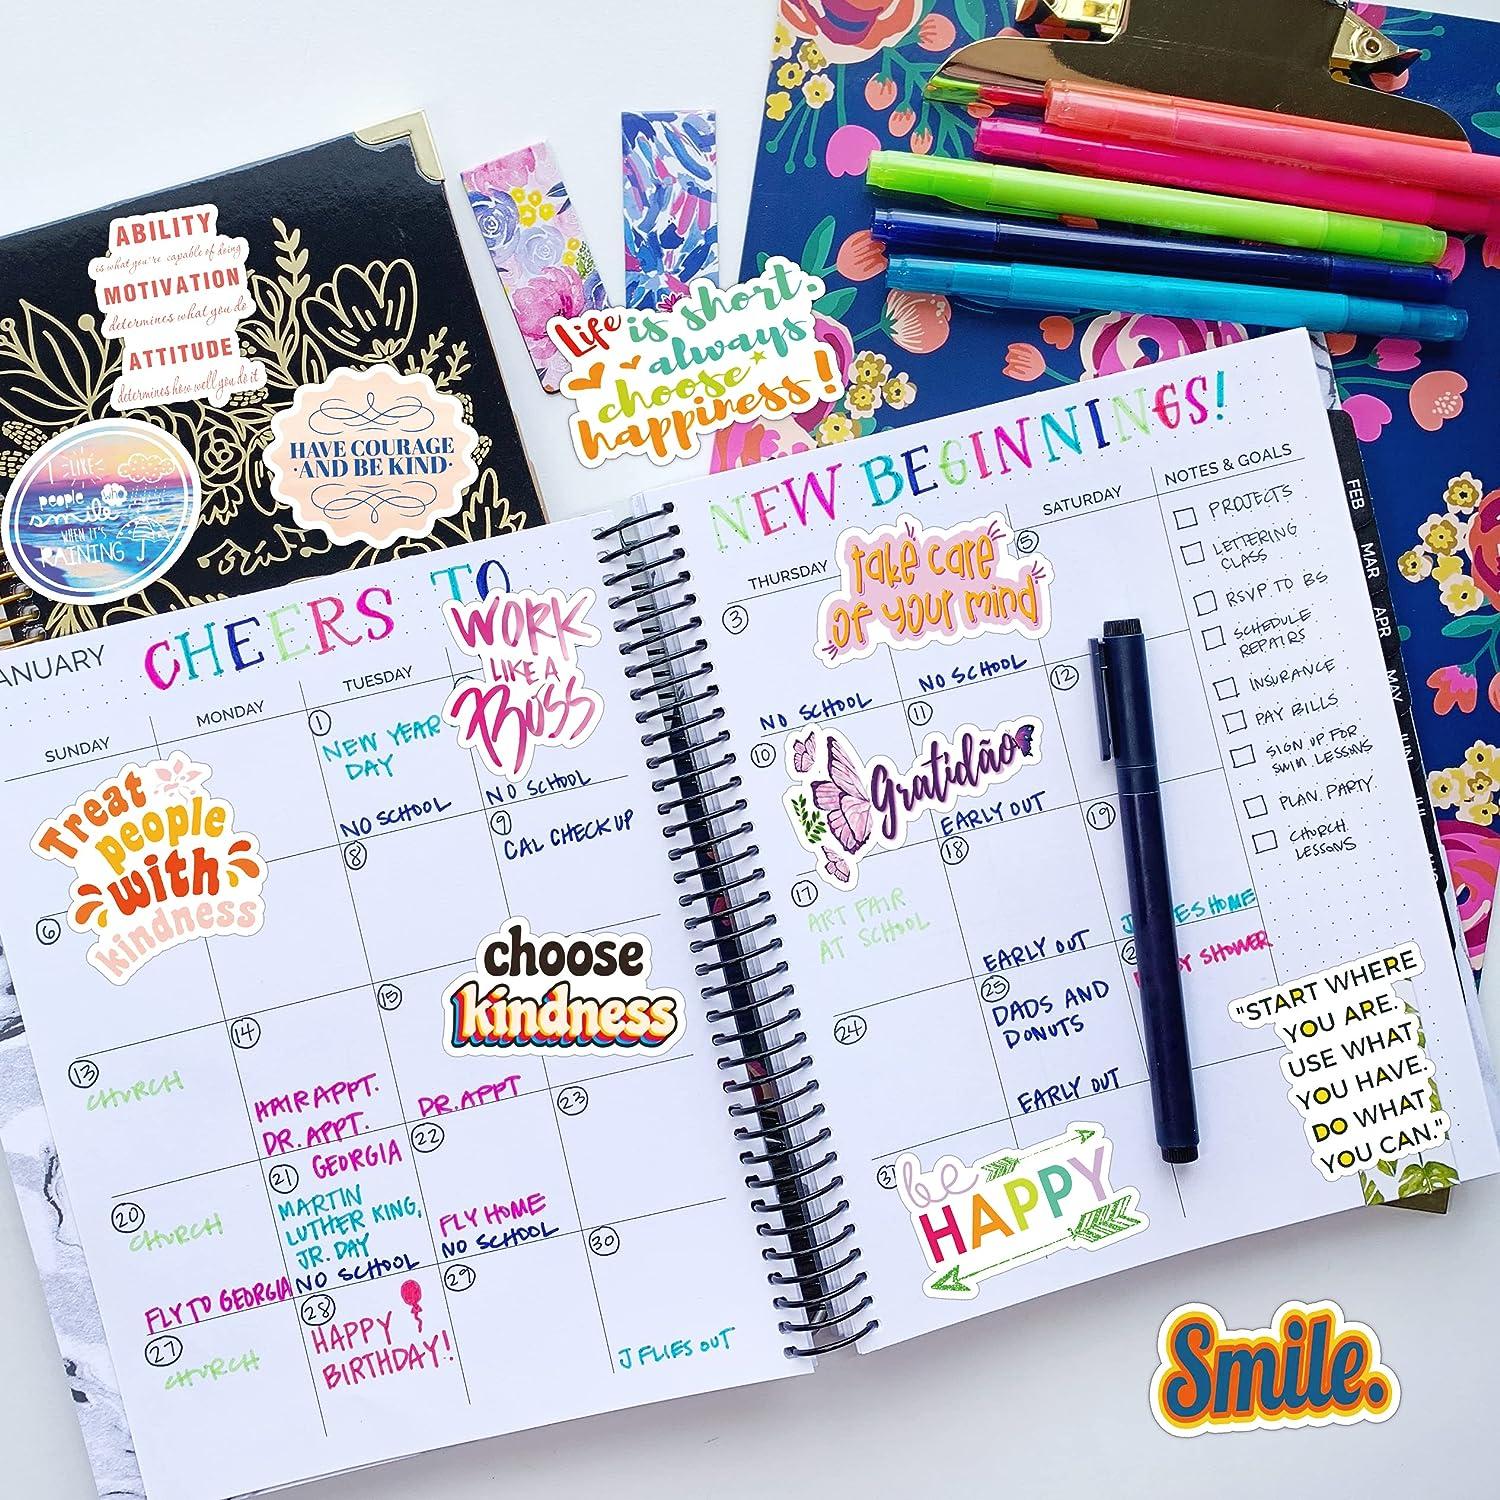 Positive Affirmation Stickers - Motivational Stickers for Laptops,  Tumblers, Notebooks and More! Self Care, Self Love